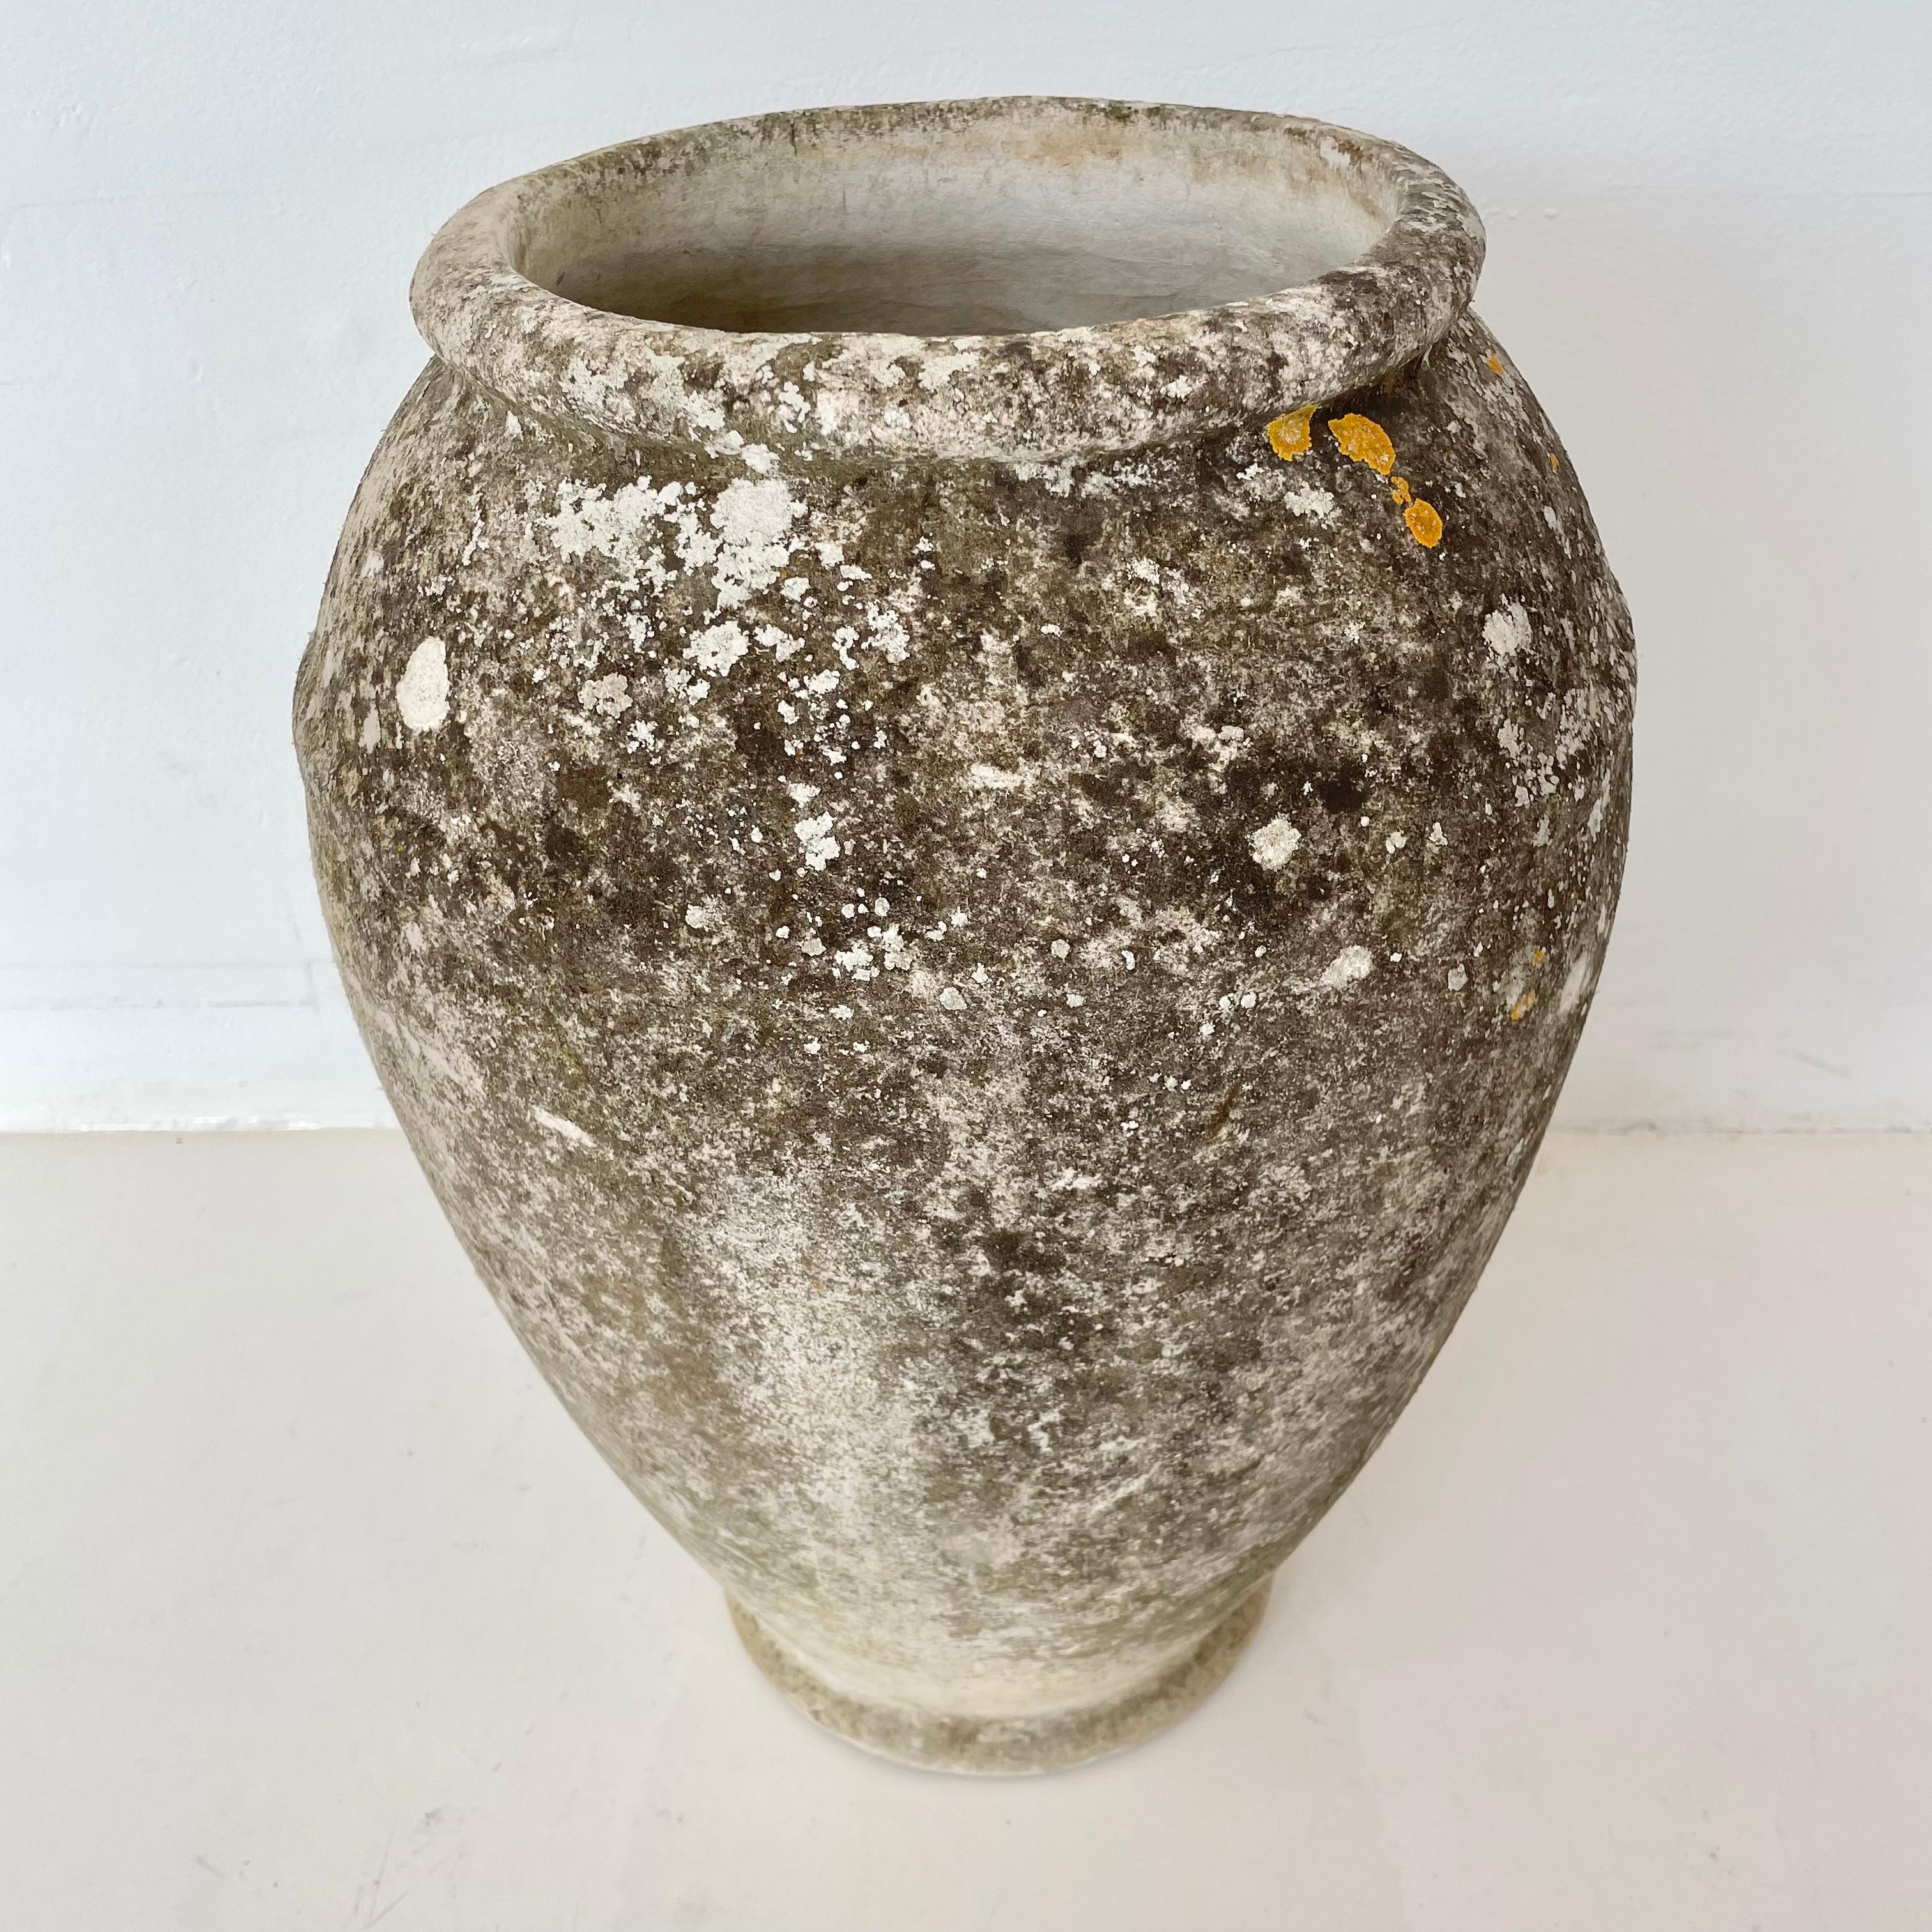 Unusual concrete urn by Willy Guhl. Rare model. Excellent patina. Great vintage condition. Only one available.

Opening of top is 8.5